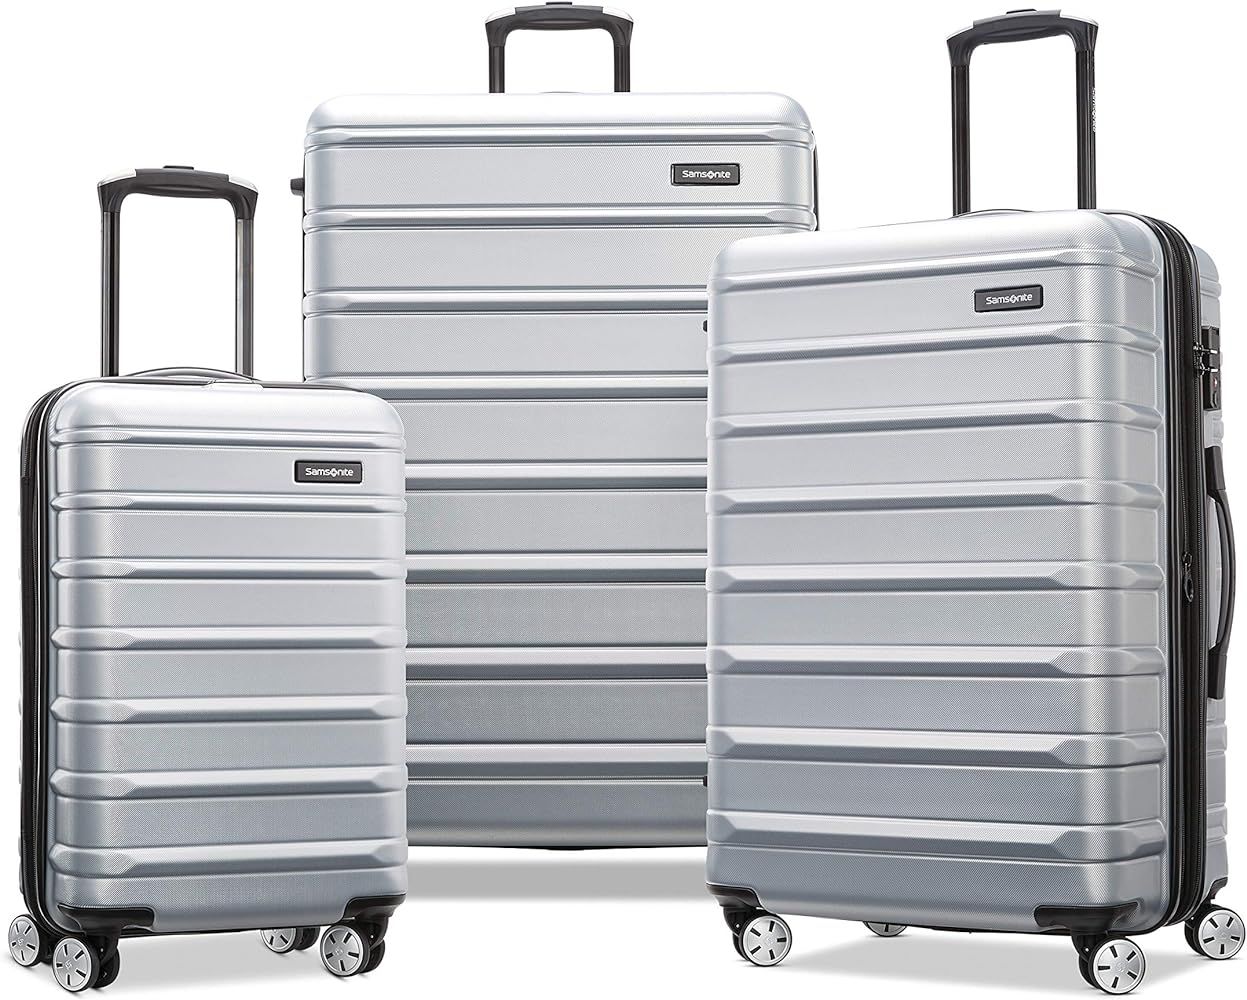 Samsonite Omni 2 Hardside Expandable Luggage with Spinner Wheels, Artic Silver, 3-Piece Set (20/2... | Amazon (US)